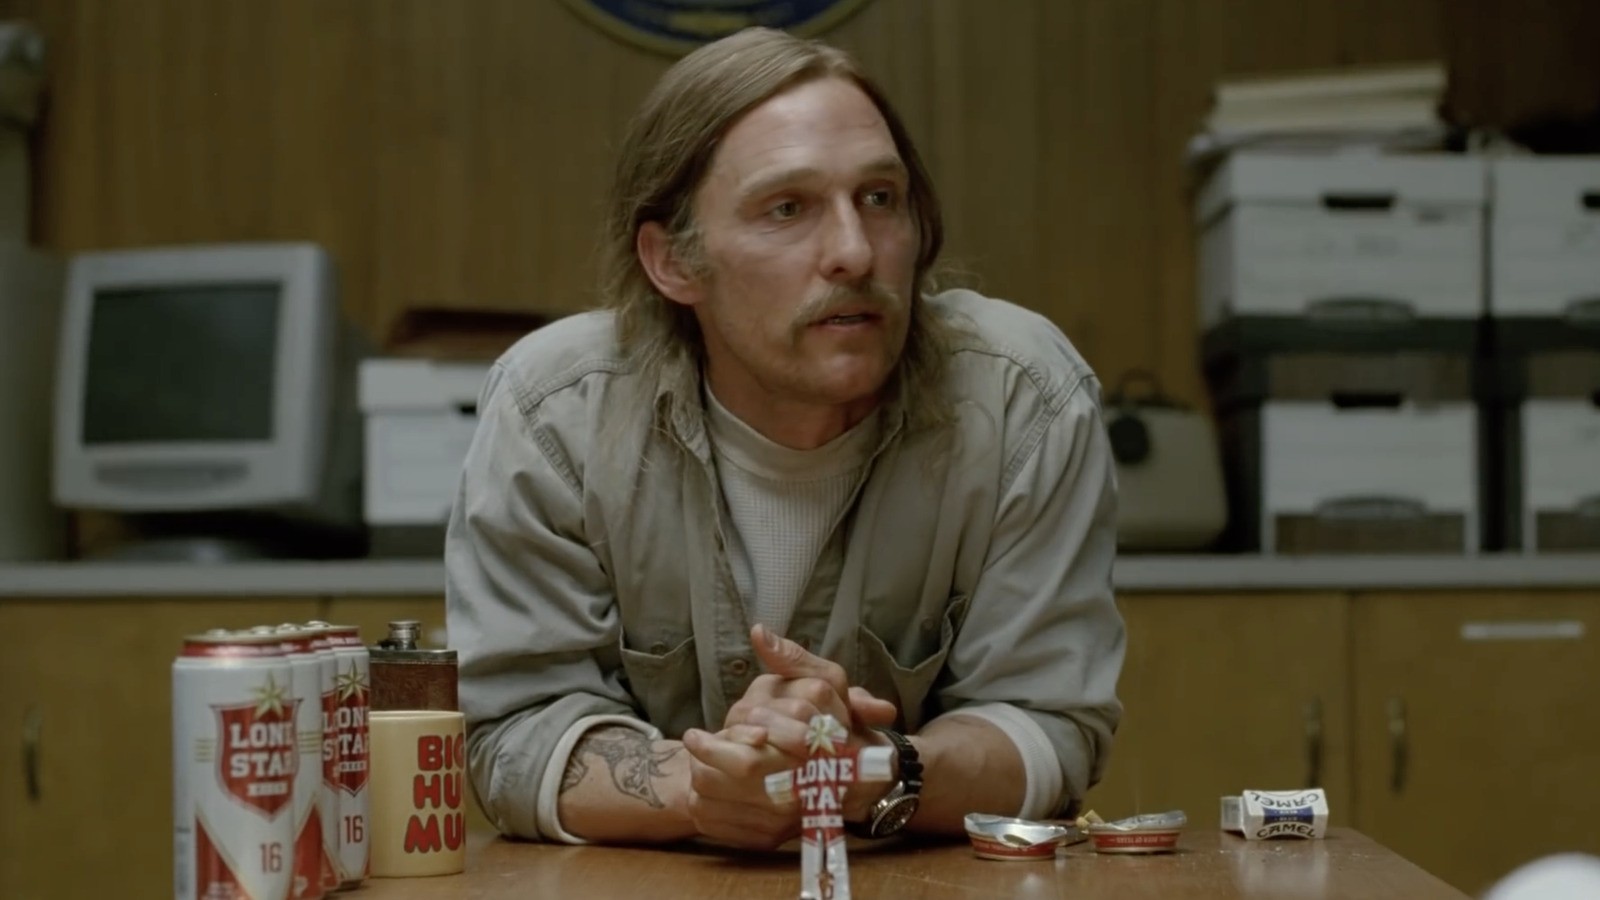 True Detective star Matthew McConaughey will sign Yellowstone spinoff series only upon one condition